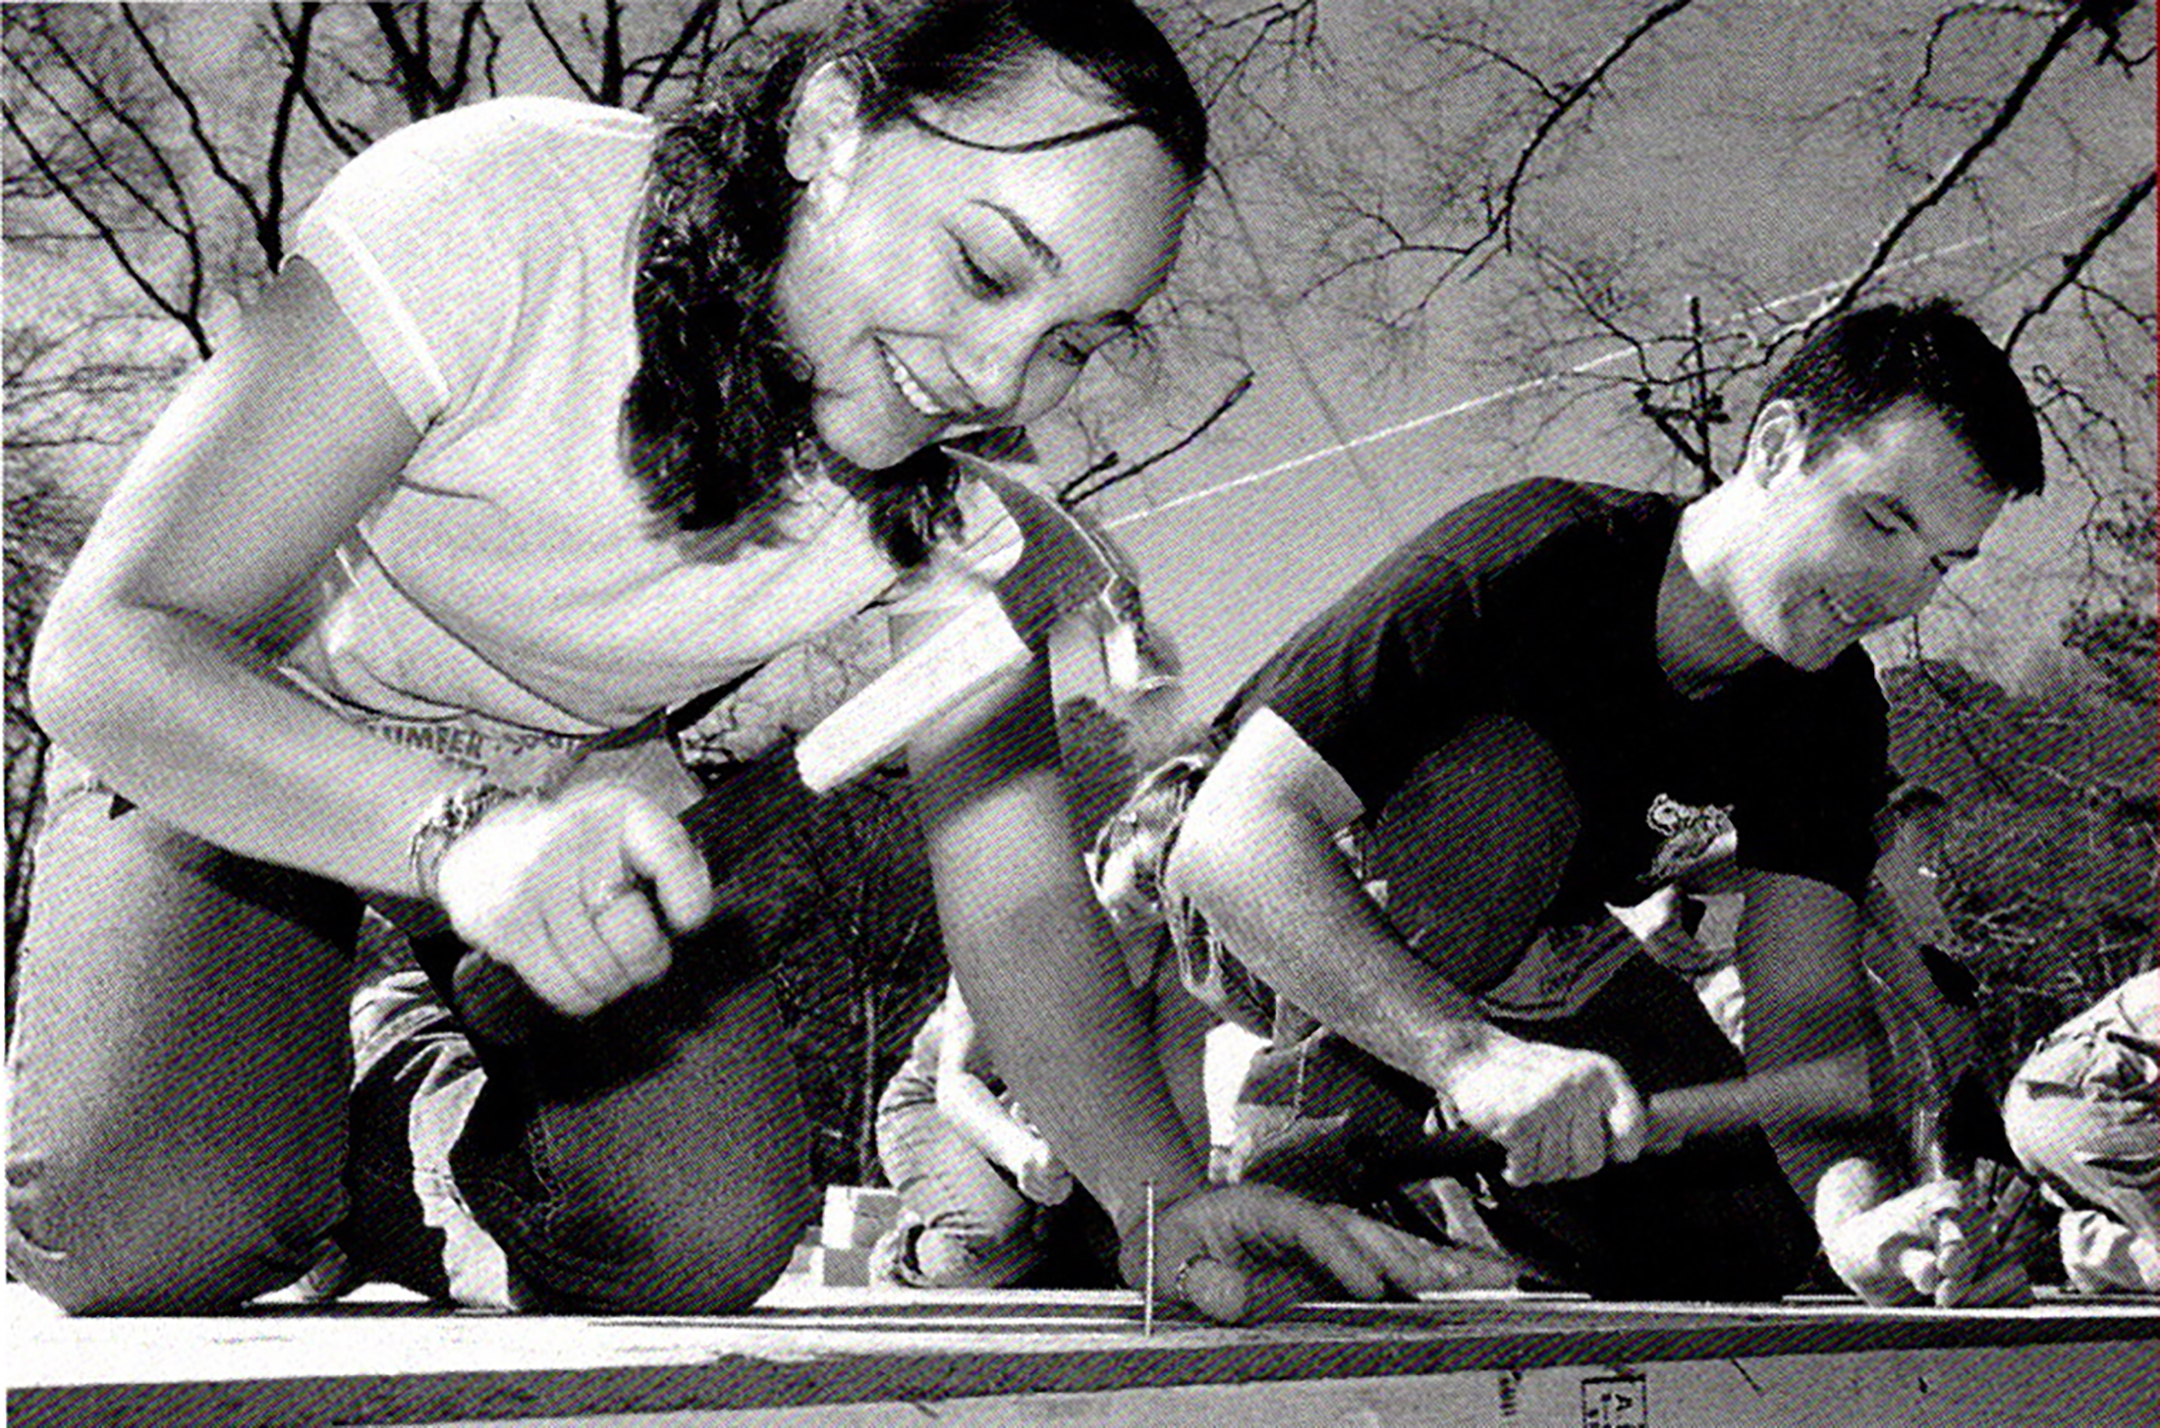 black and white photo of two students pounding nails at a worksite